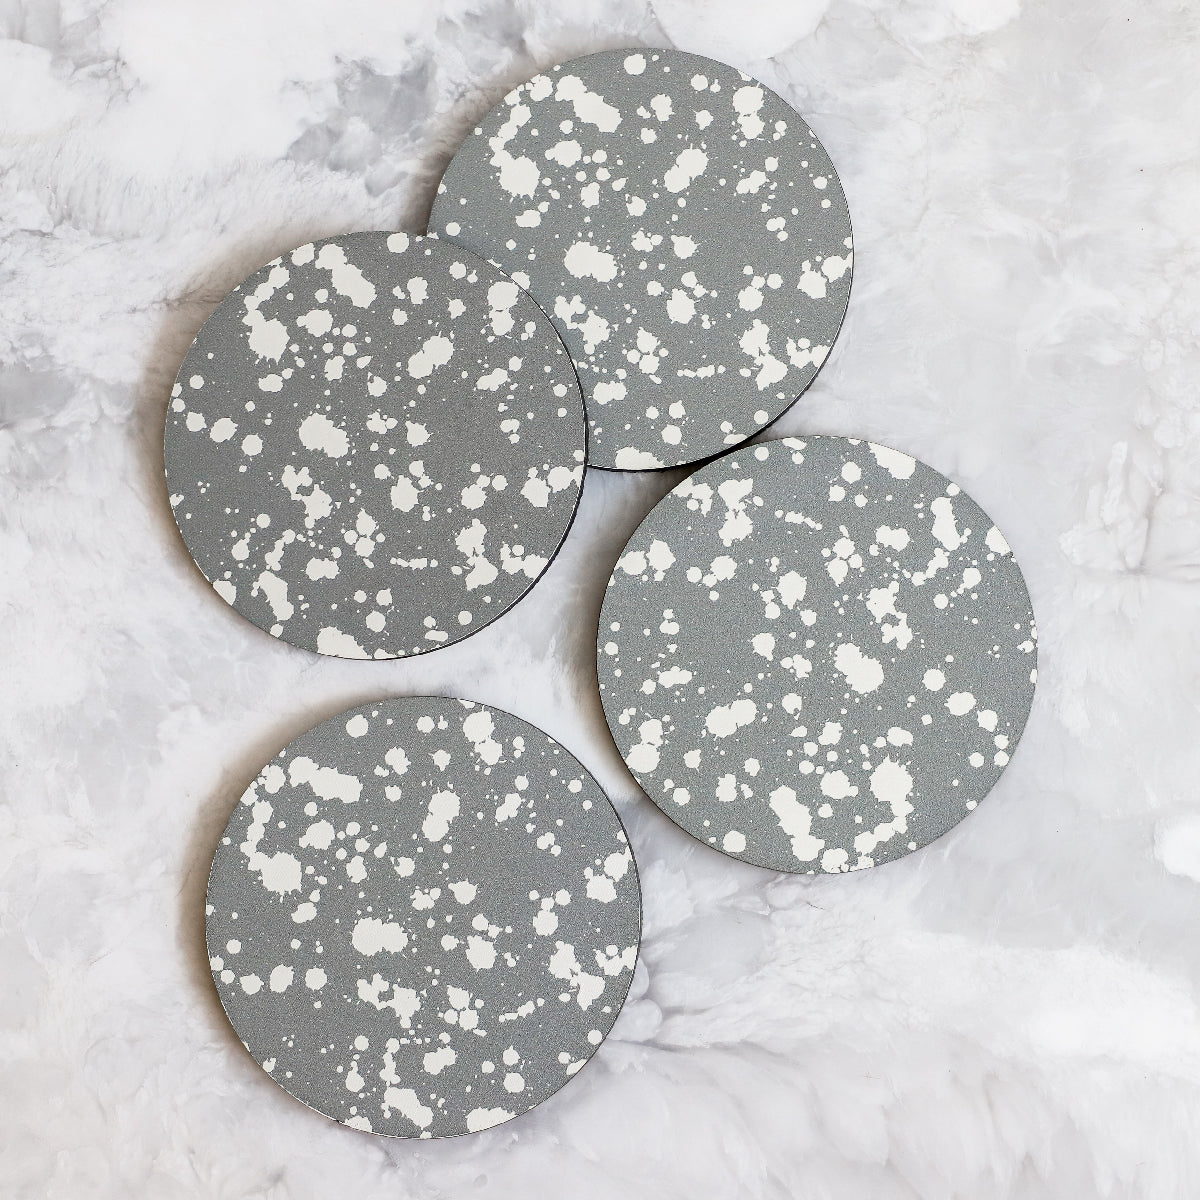 Printed Coasters with Splatter pattern in gray and white made of cork and wood by Tisch New York